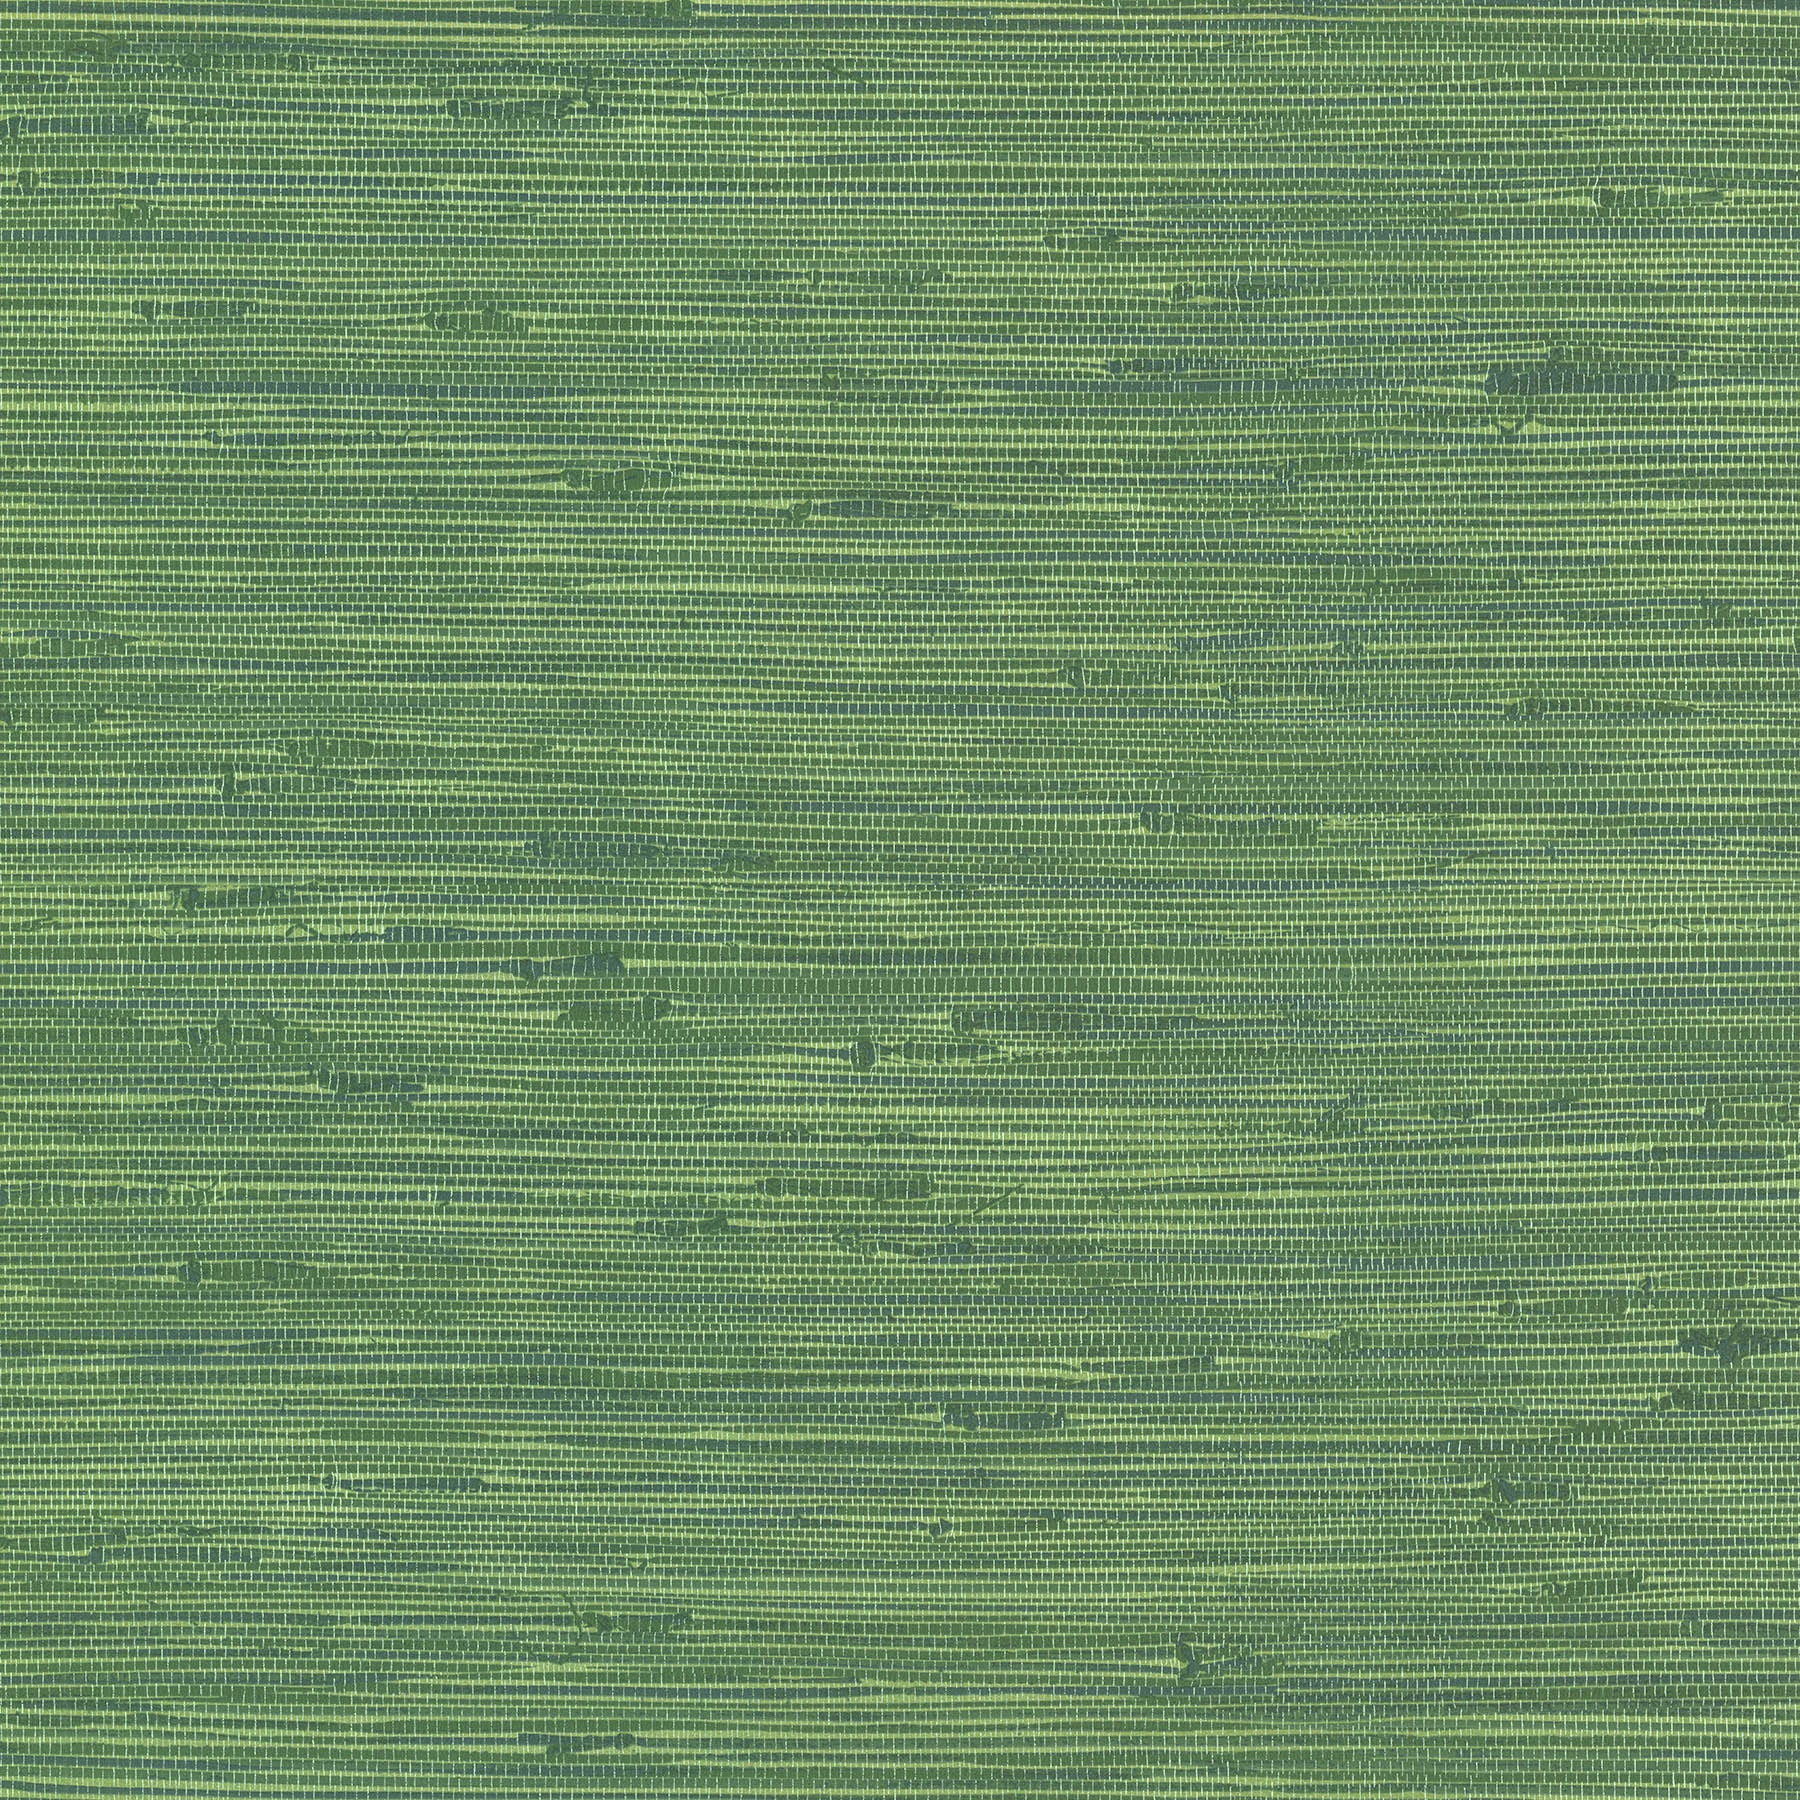 Find 2767-24419 Fiber Green Weave Texture Techniques & Finishes III Brewster